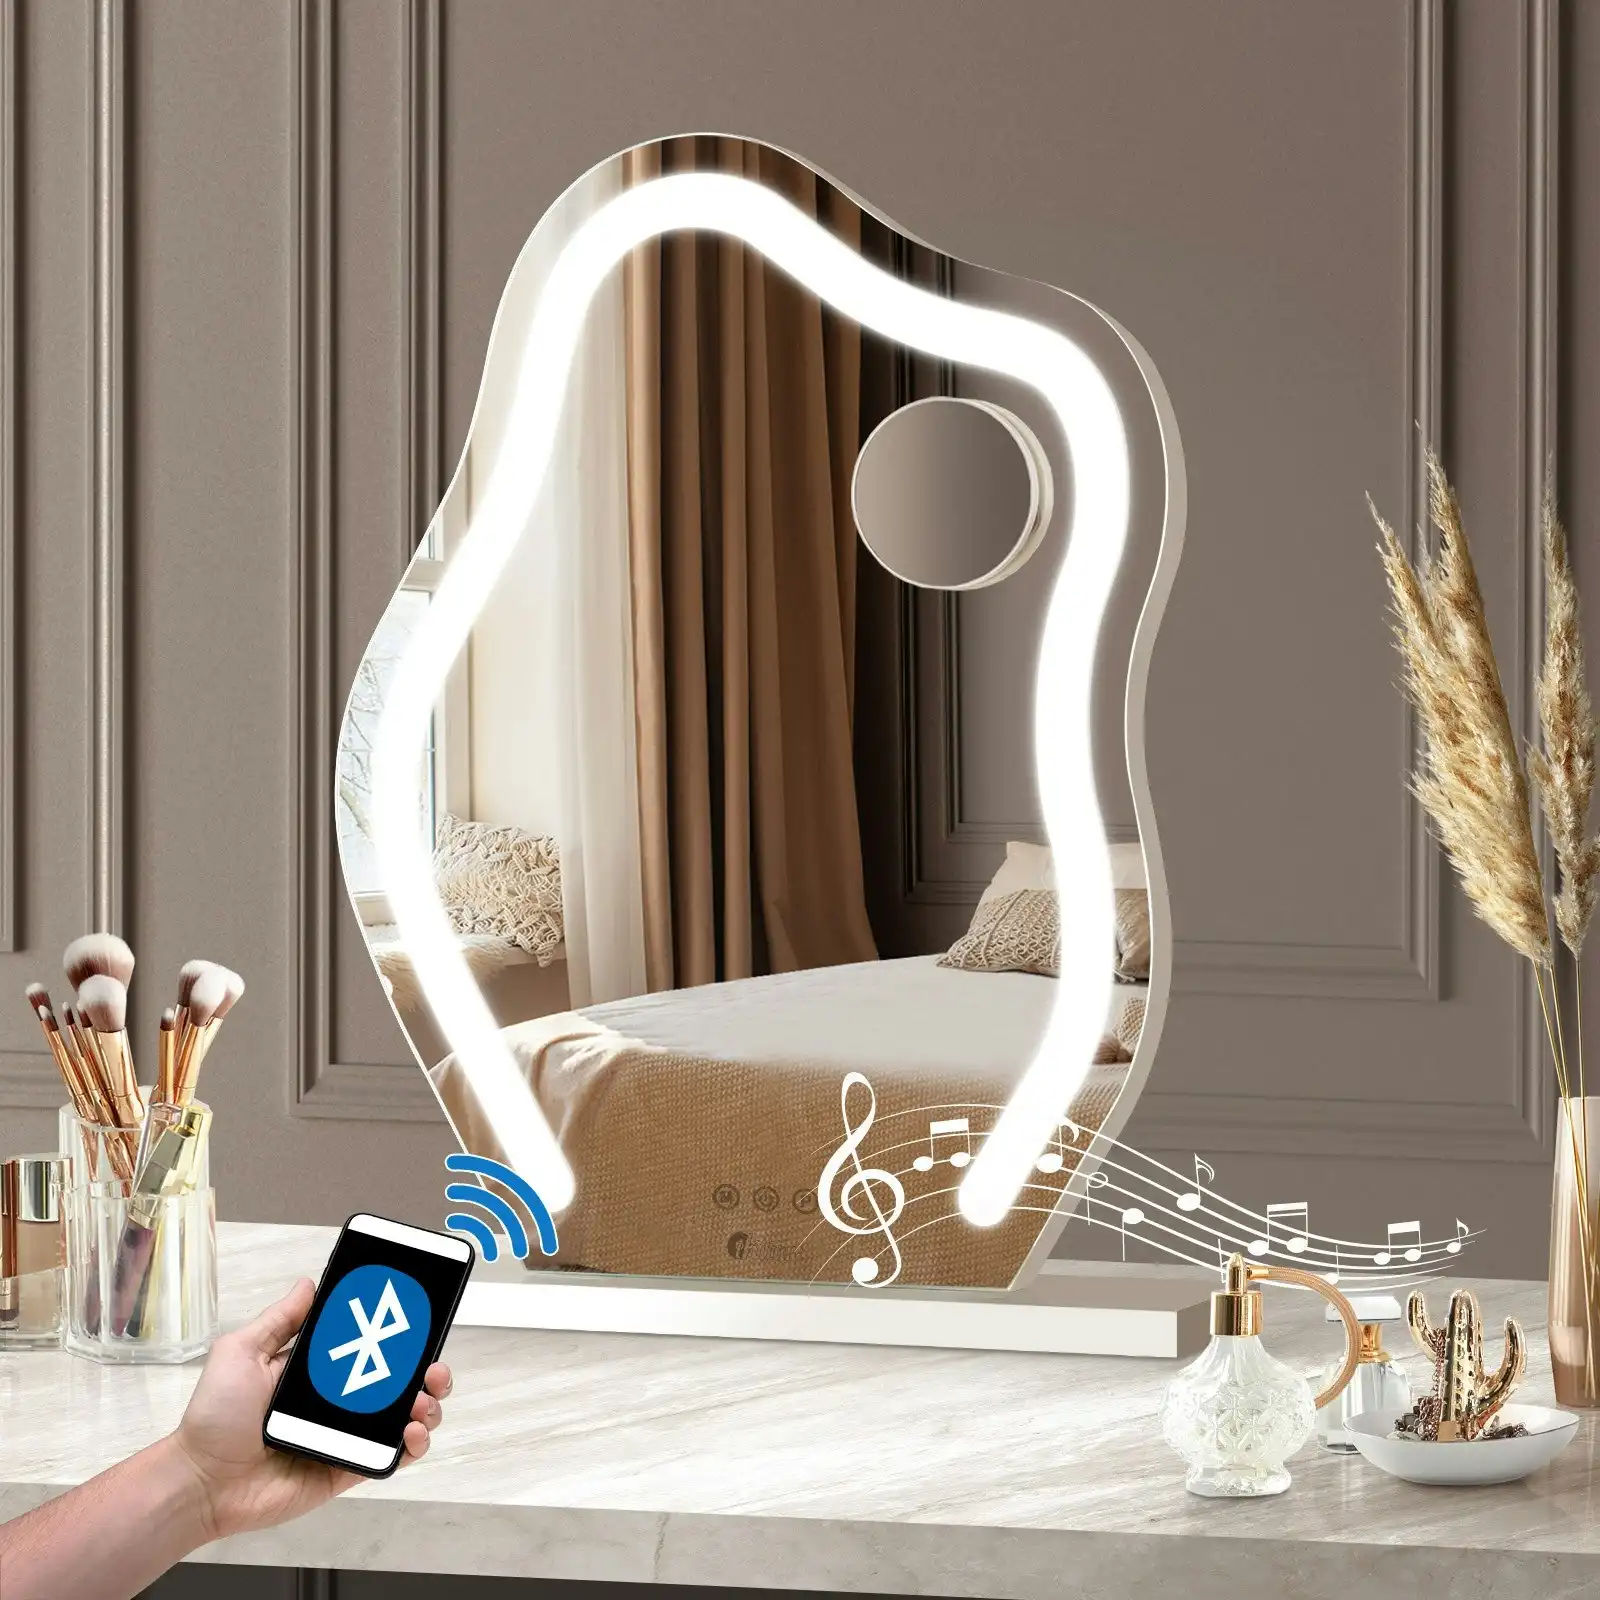 Oikiture Bluetooth Hollywood Makeup Mirror LED Light 45x58cm Vanity Mirrors